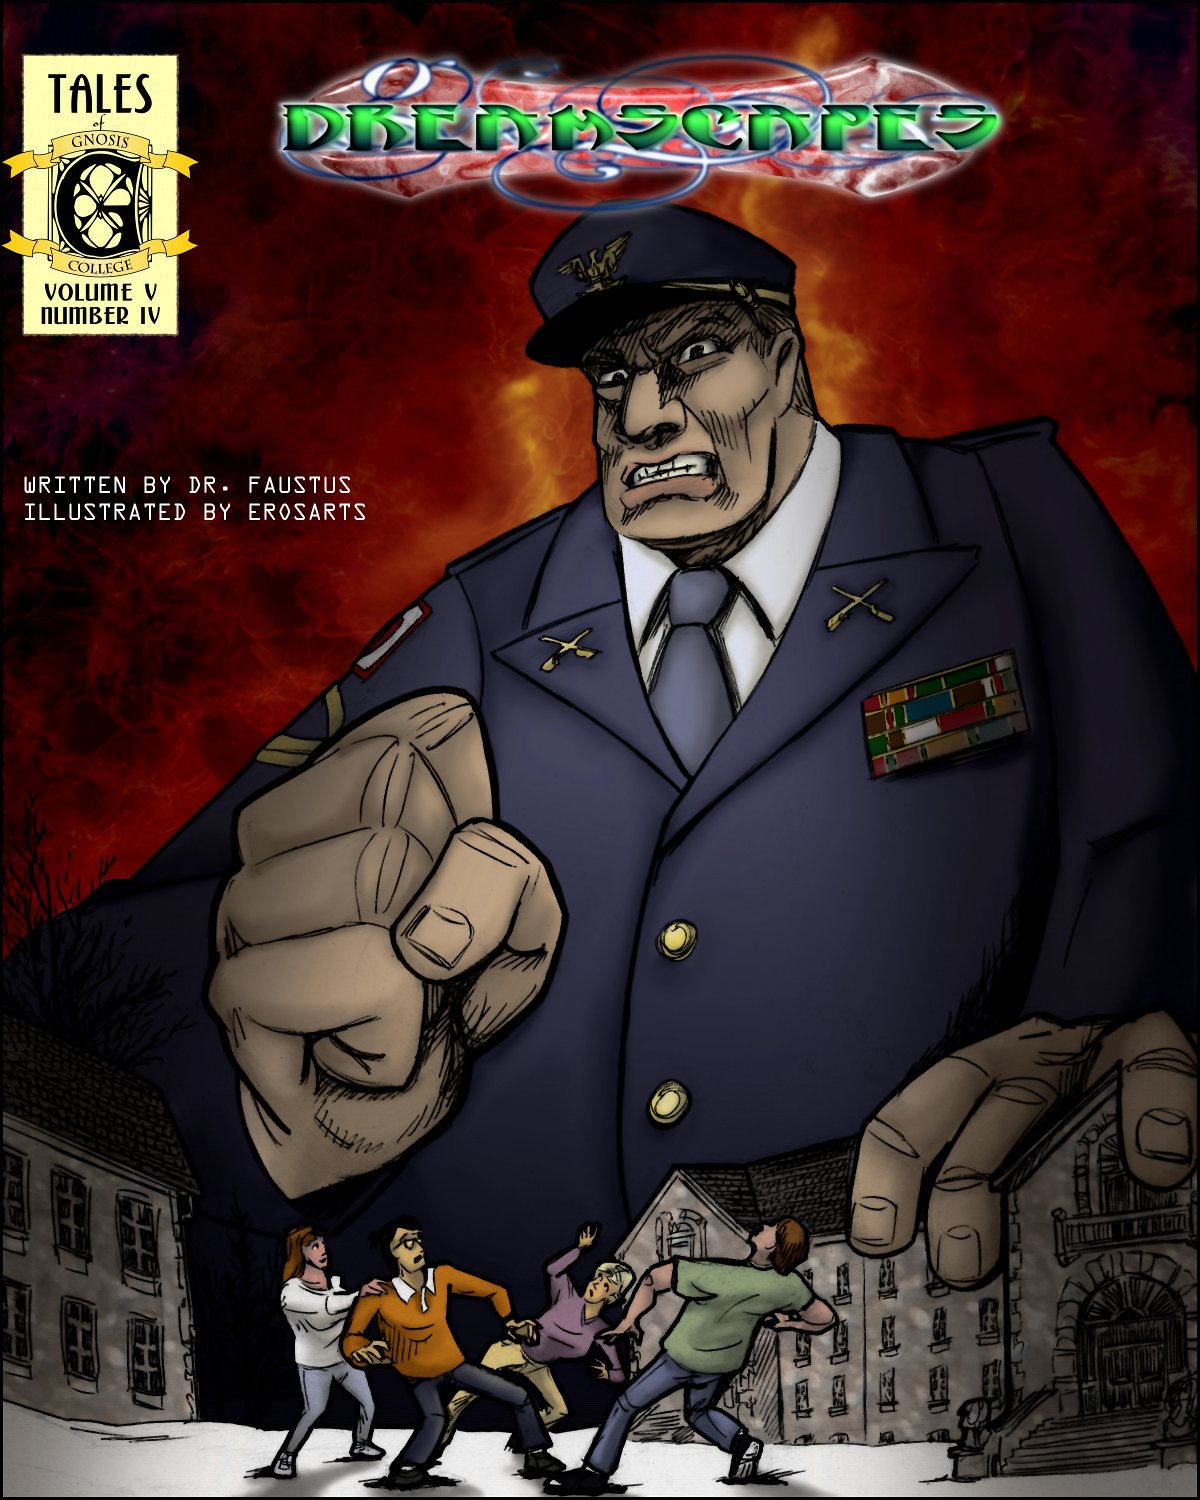 The giant fist of Colonel Madder reaches down to crush our heroes!  